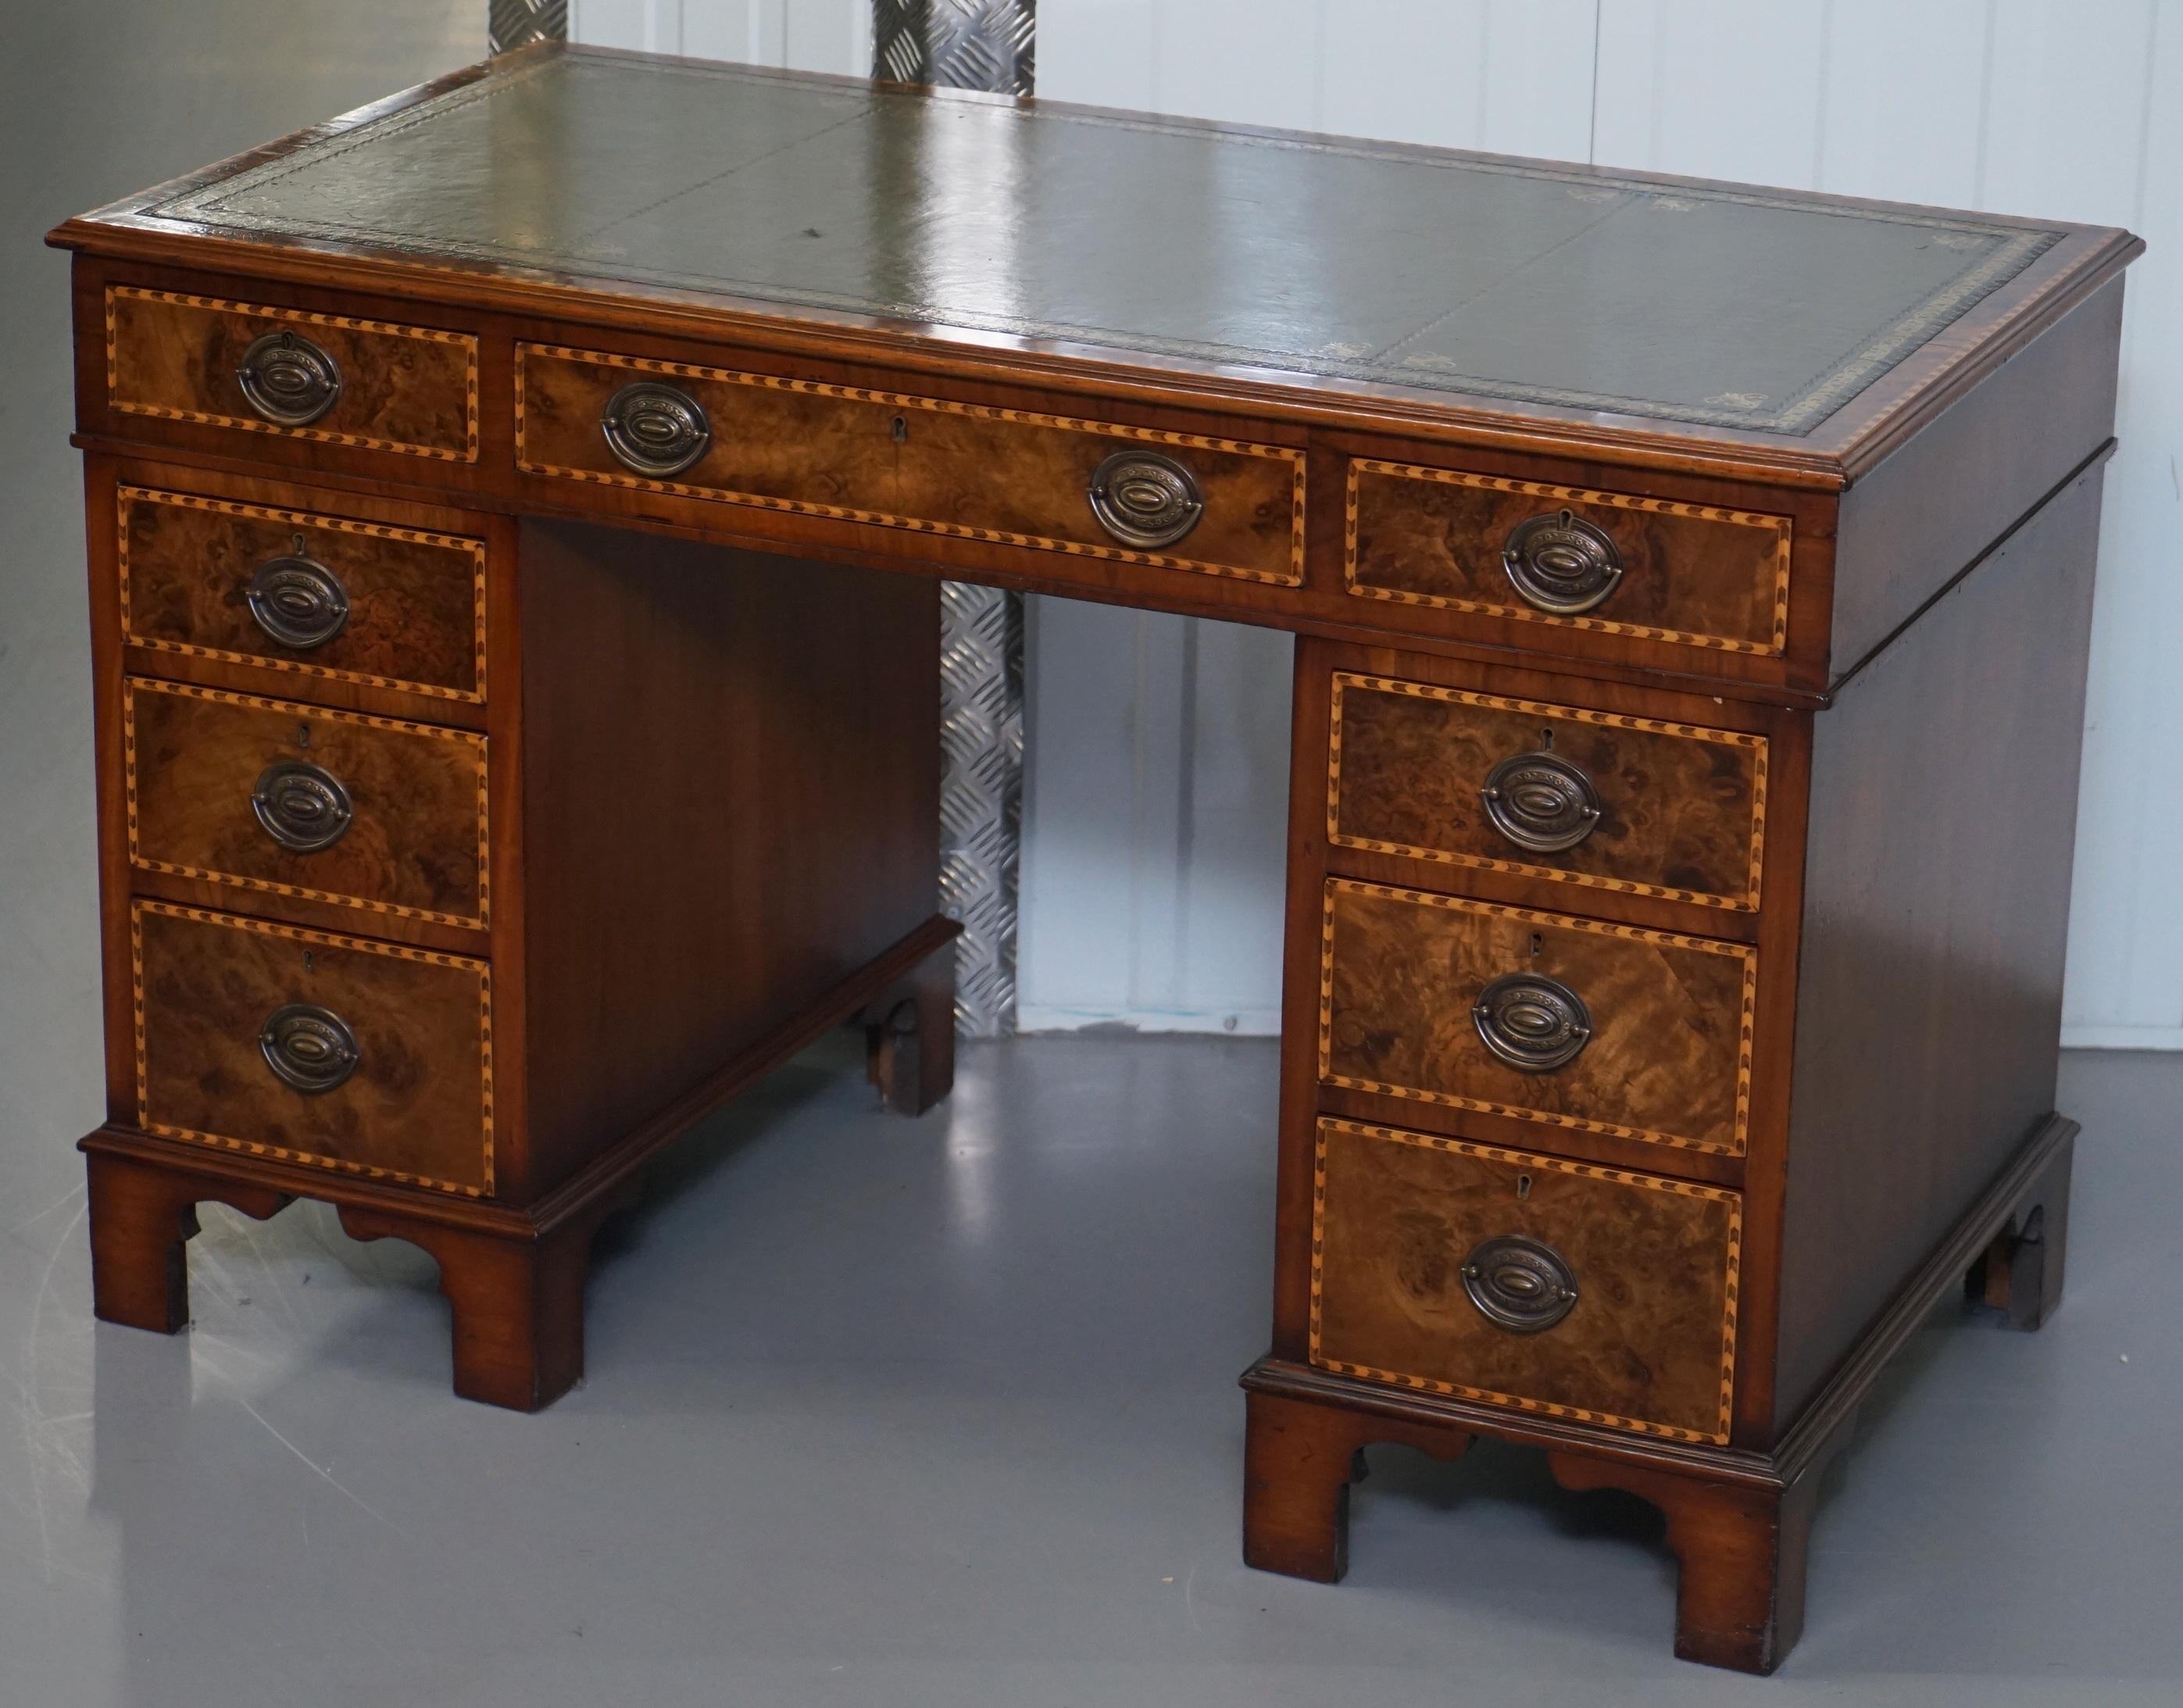 Hand-Crafted Rare Victorian Burr Oak & Walnut Merryweather London 1885 Stamped Desk, Leather For Sale